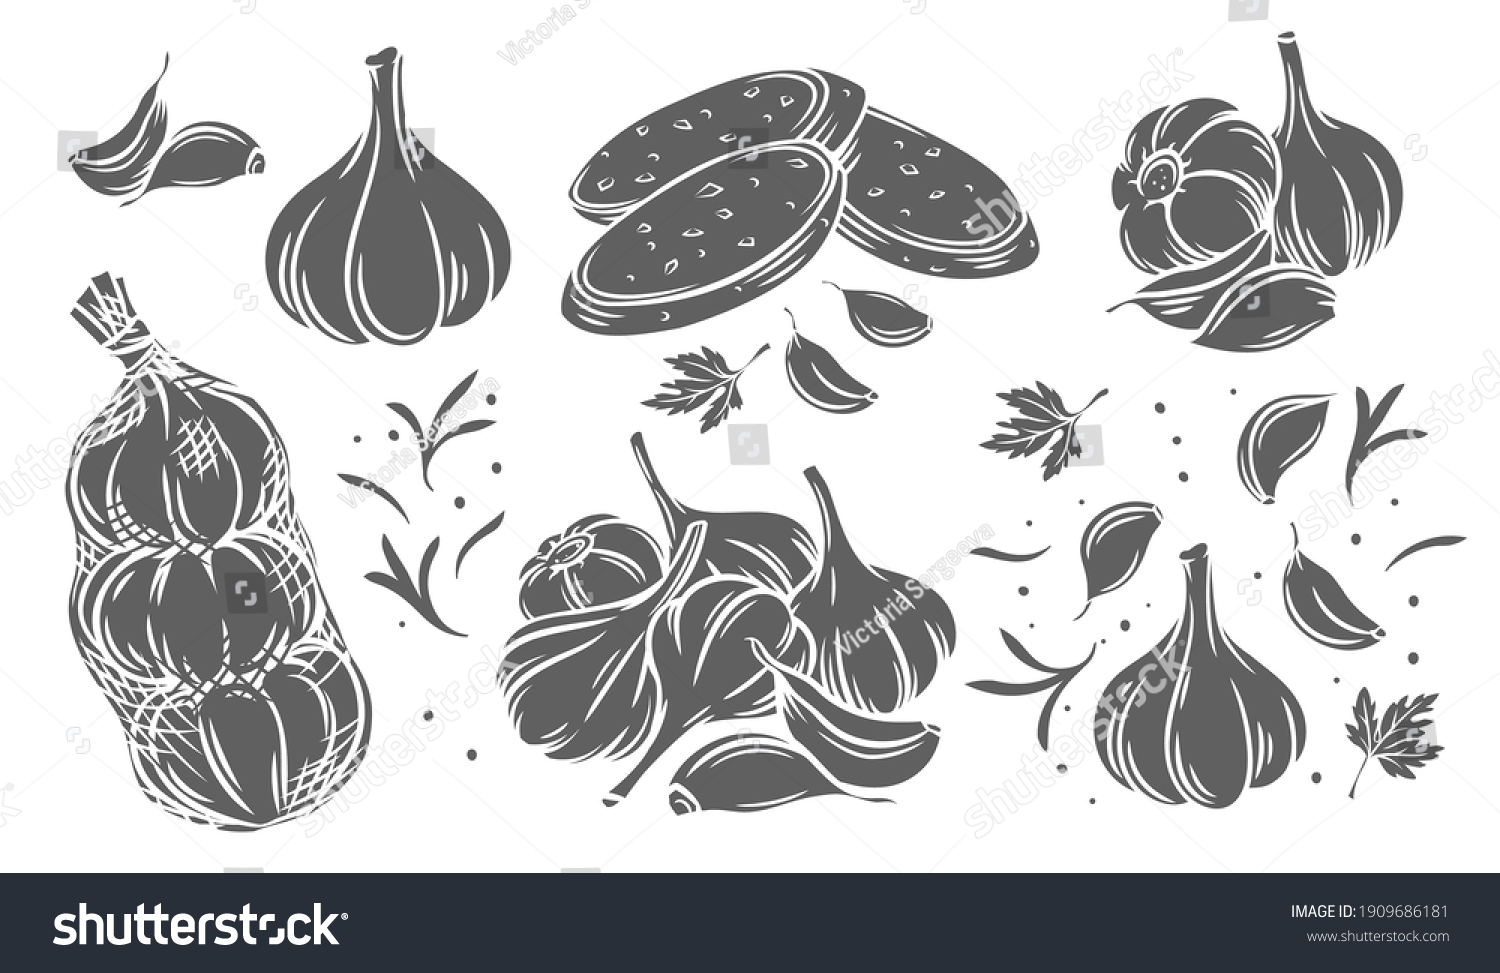 Garlic glyph monochrome icon set. Silhouette pile of garlic bulbs, in net bag and runchy garlic bread. Vector illustration of vegetables, farm product. #1909686181